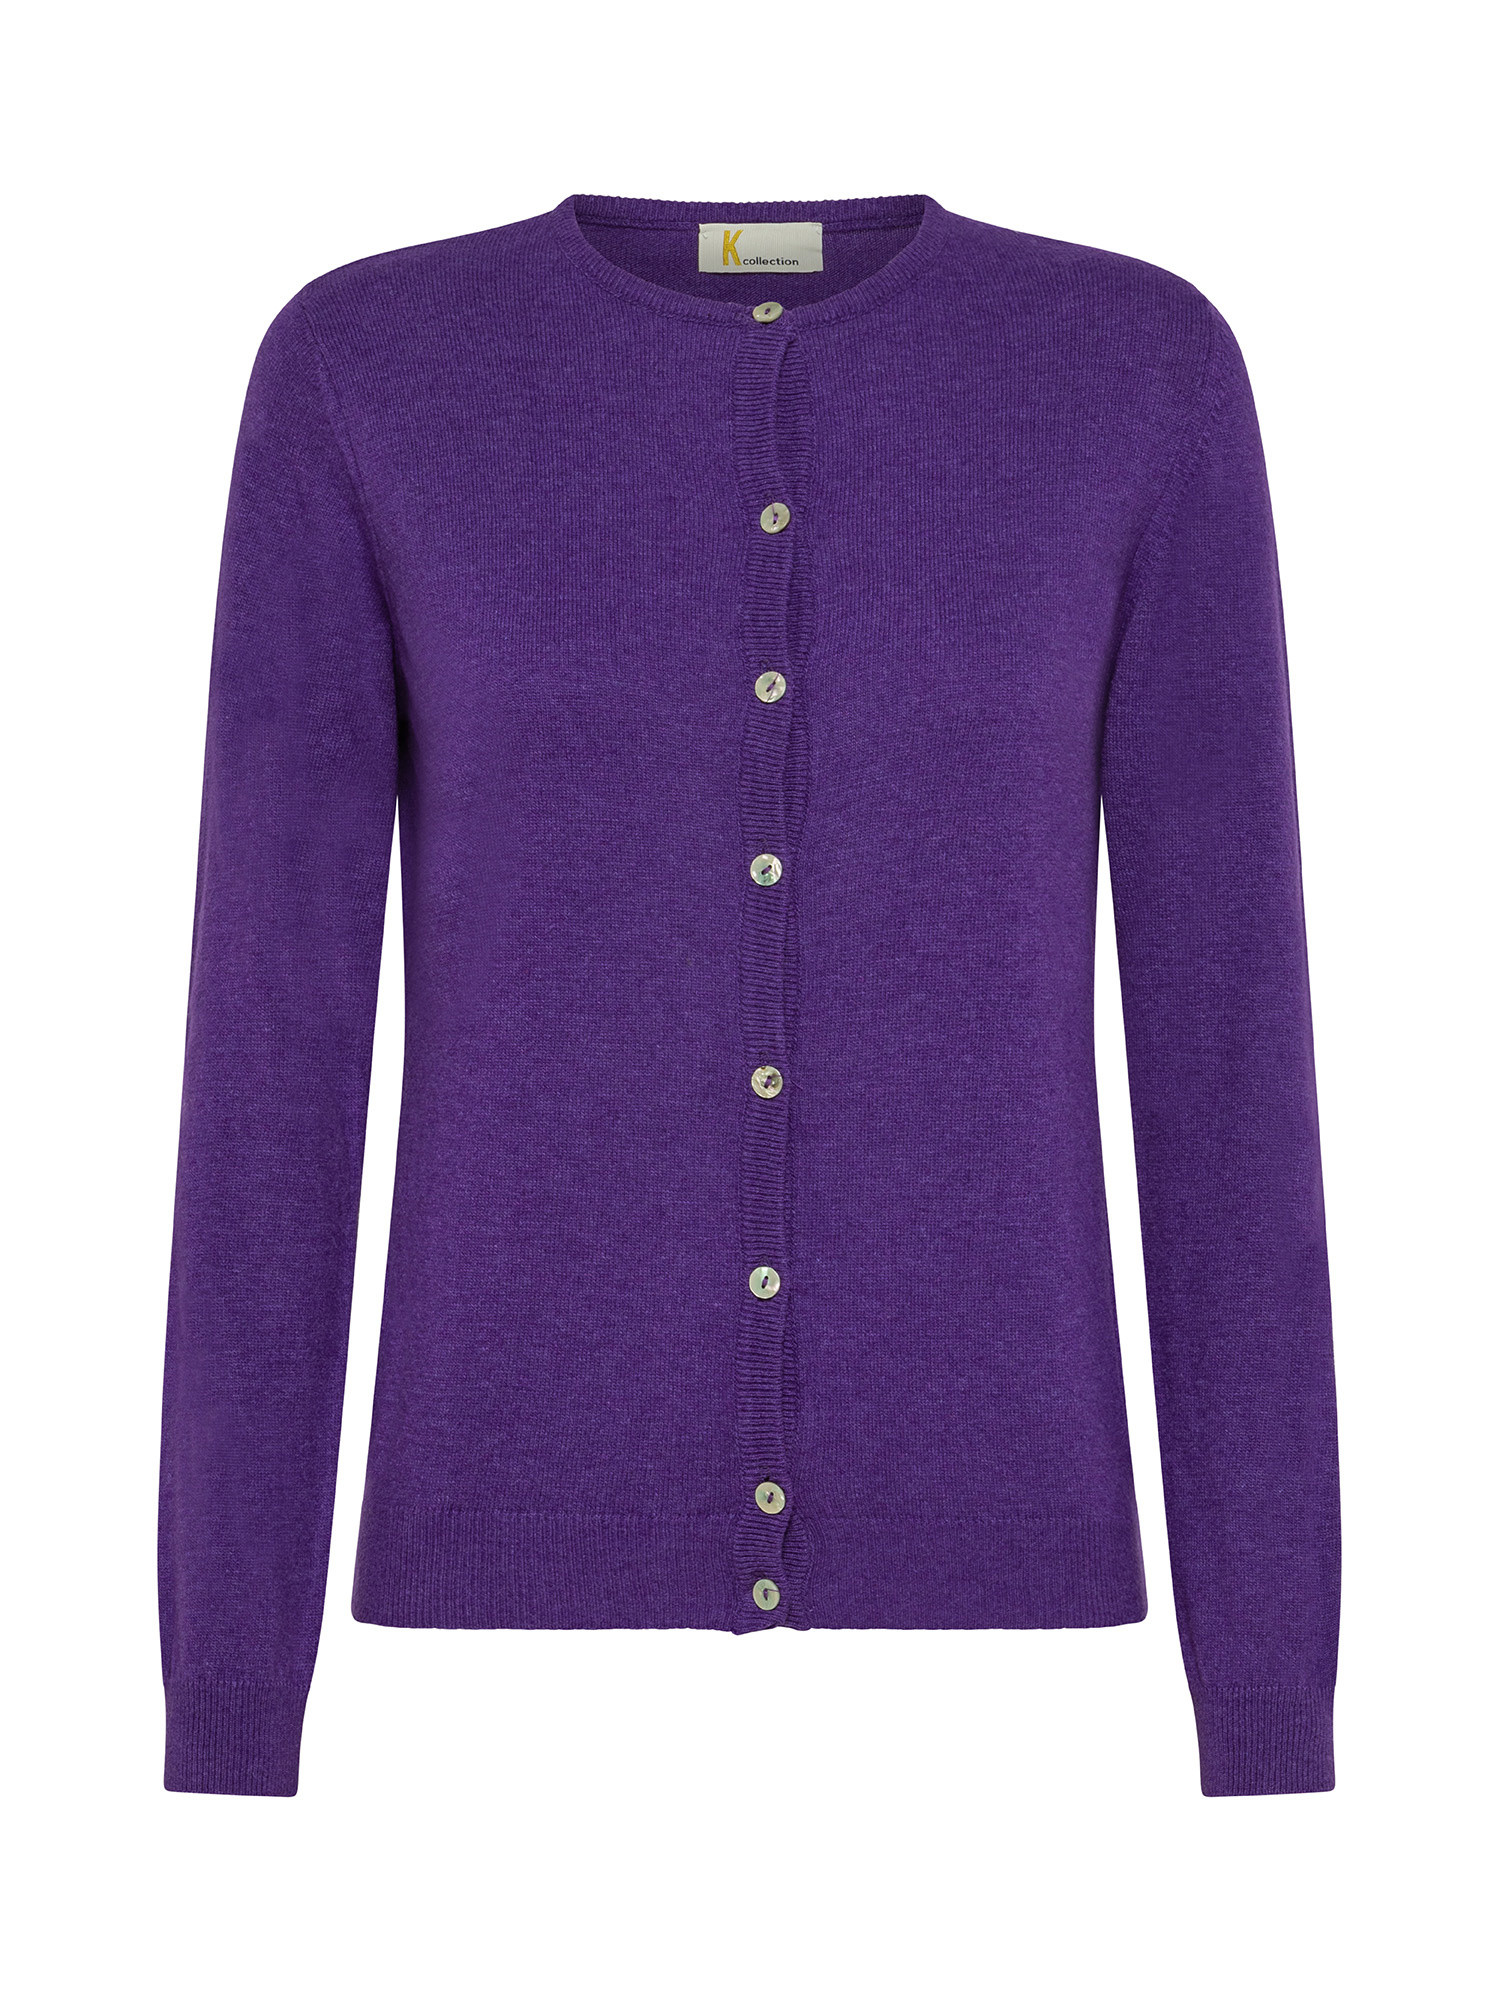 K Collection - Cardigan, Purple, large image number 0